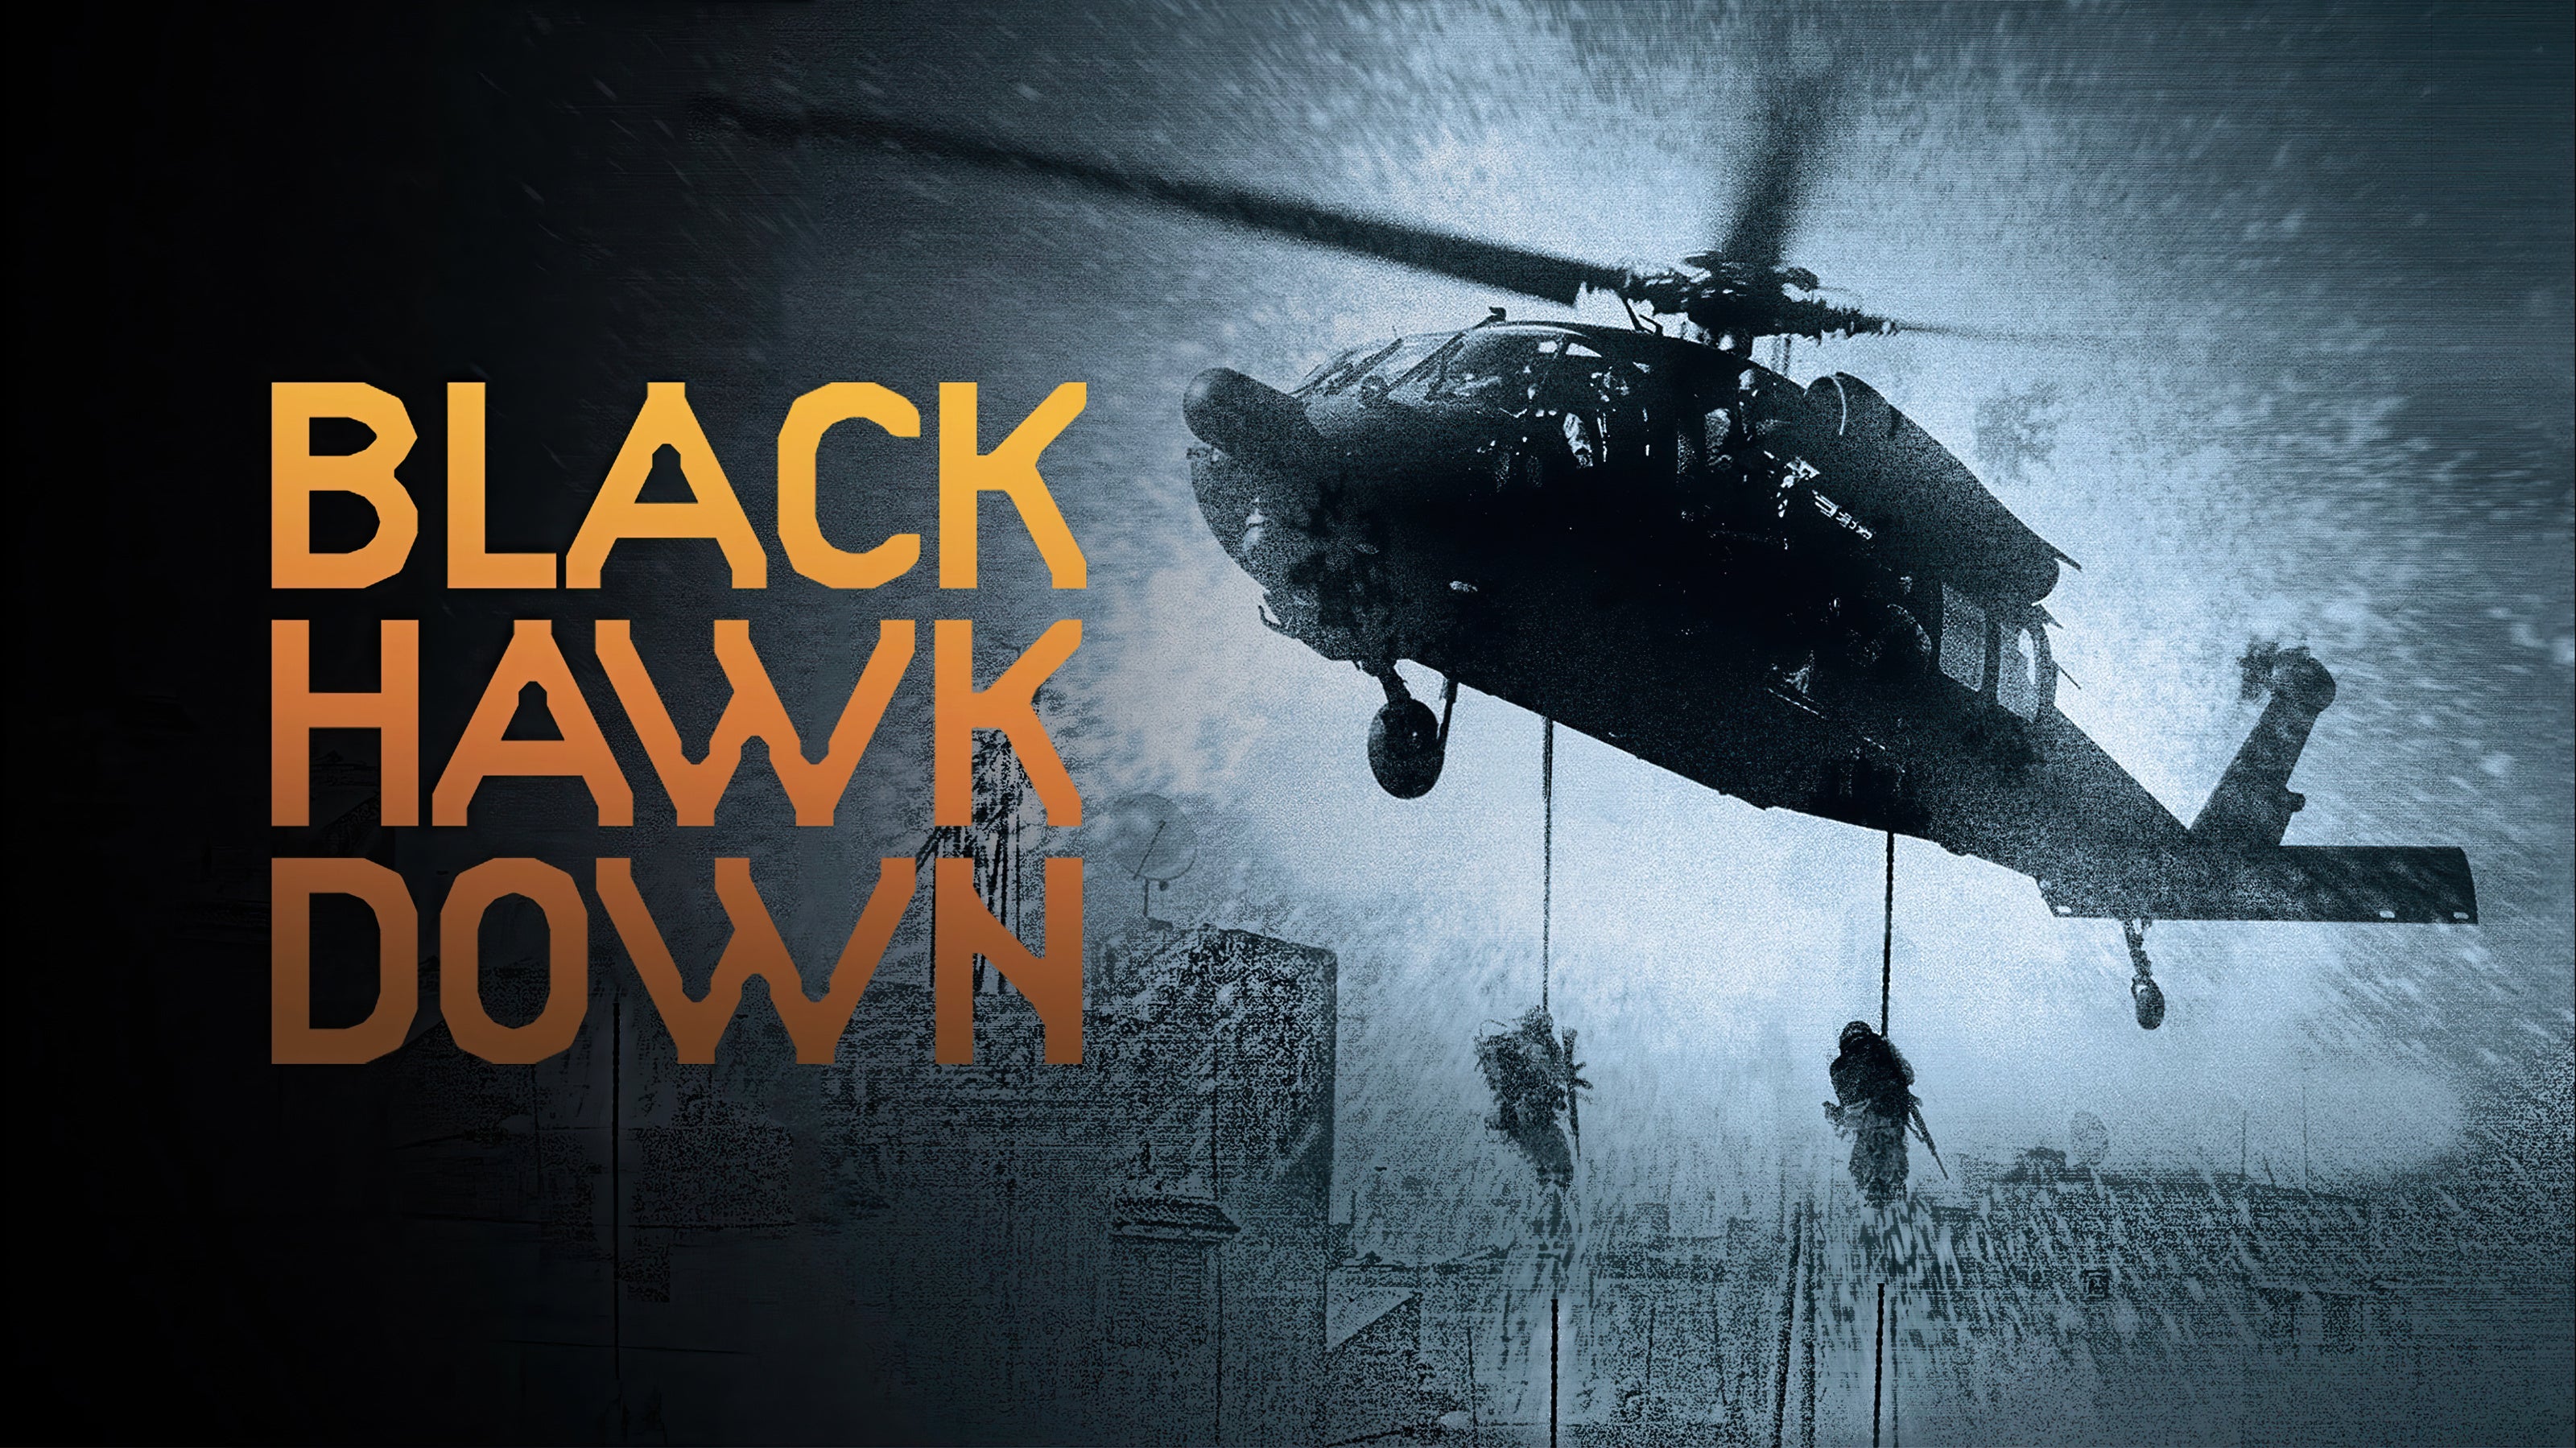 Black Hawk Down - Book Notes Review - Image from Movie 